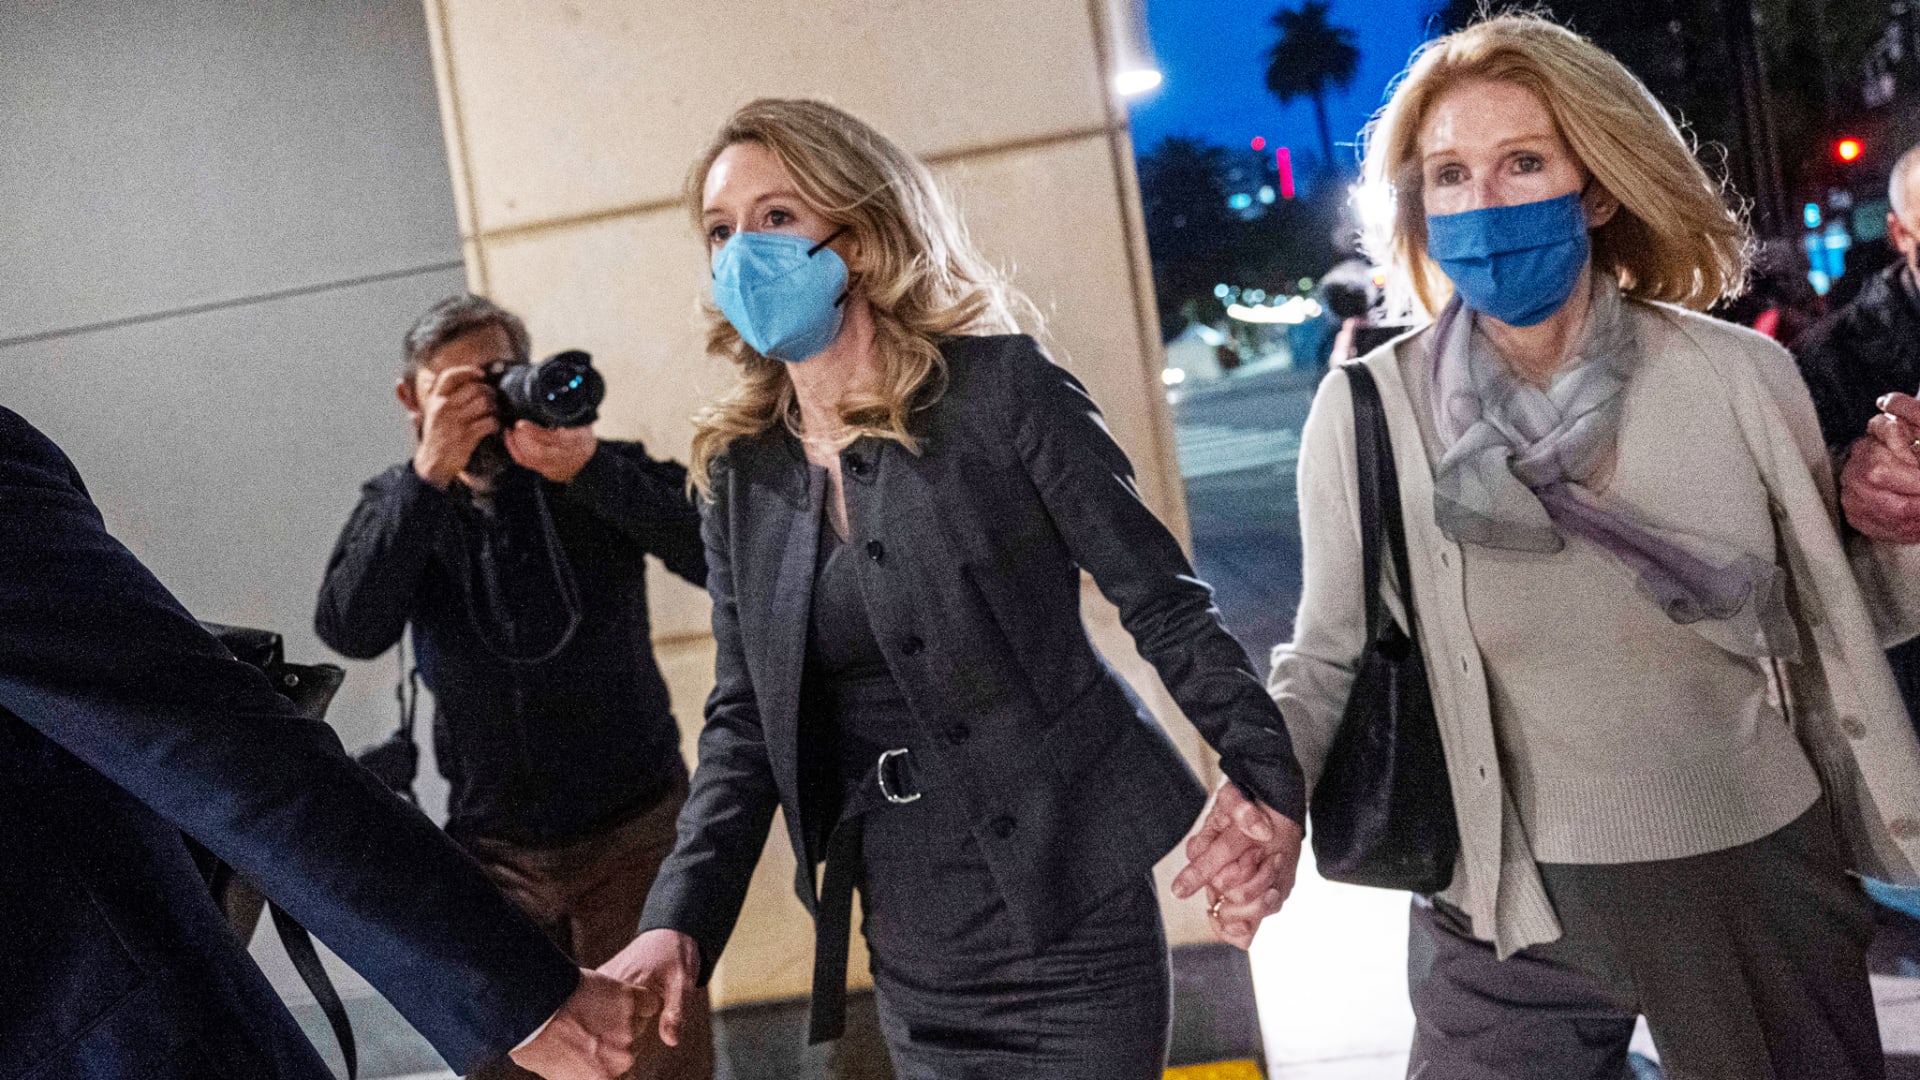 Theranos founder Elizabeth Holmes (left) departs from federal court with her mother, Noel Holmes, in San Jose, California.